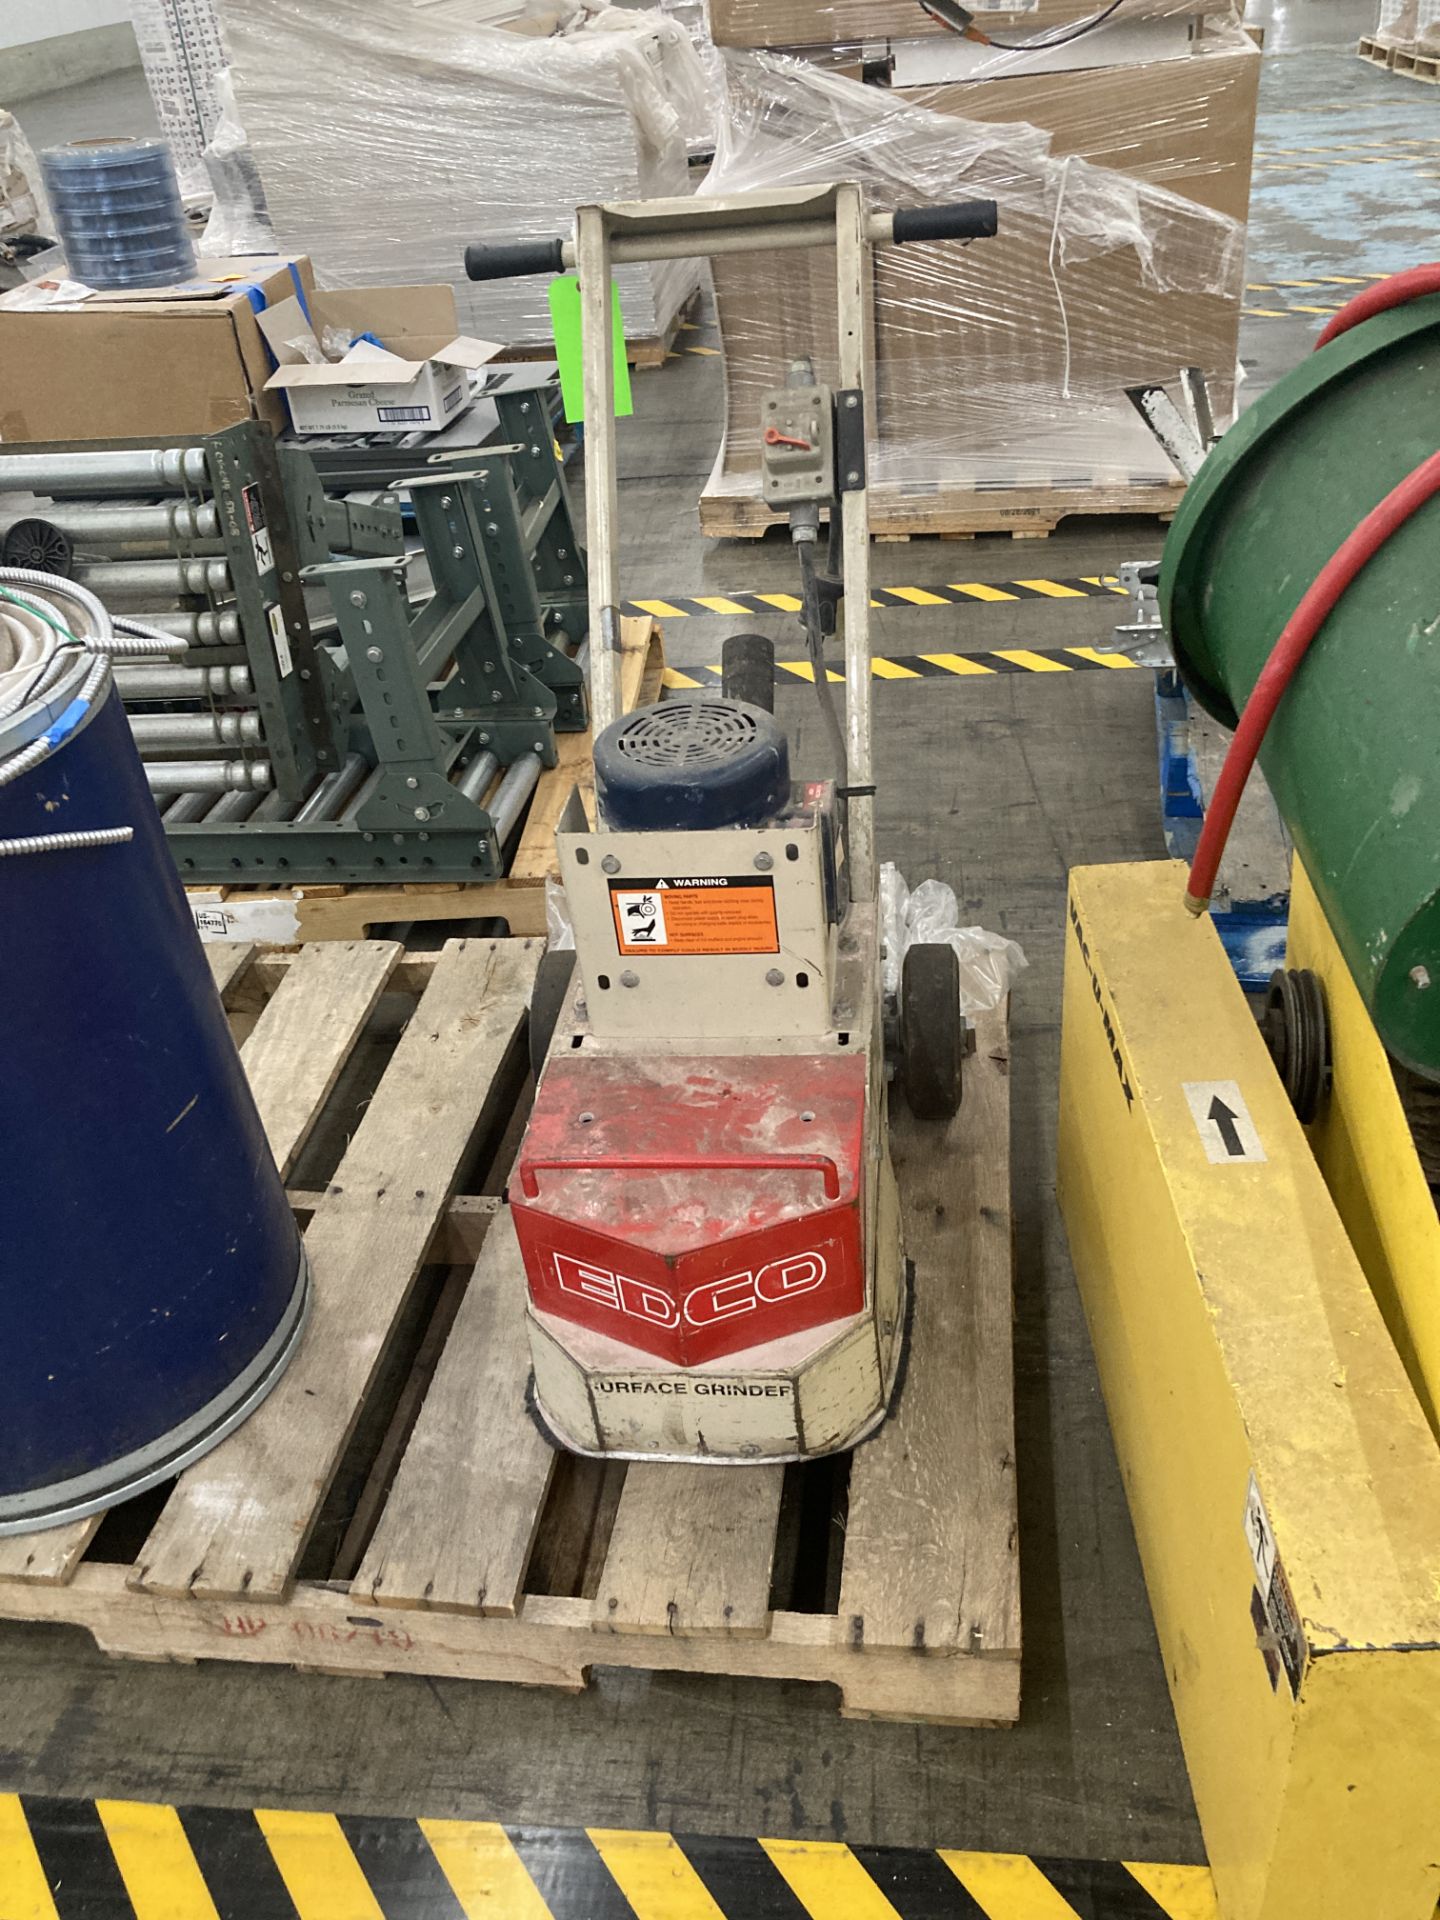 LOT OF pallet, Edco surface grinder, model SEC-15L and barrel with diaphragm pump Rig Fee: $50 - Image 2 of 3